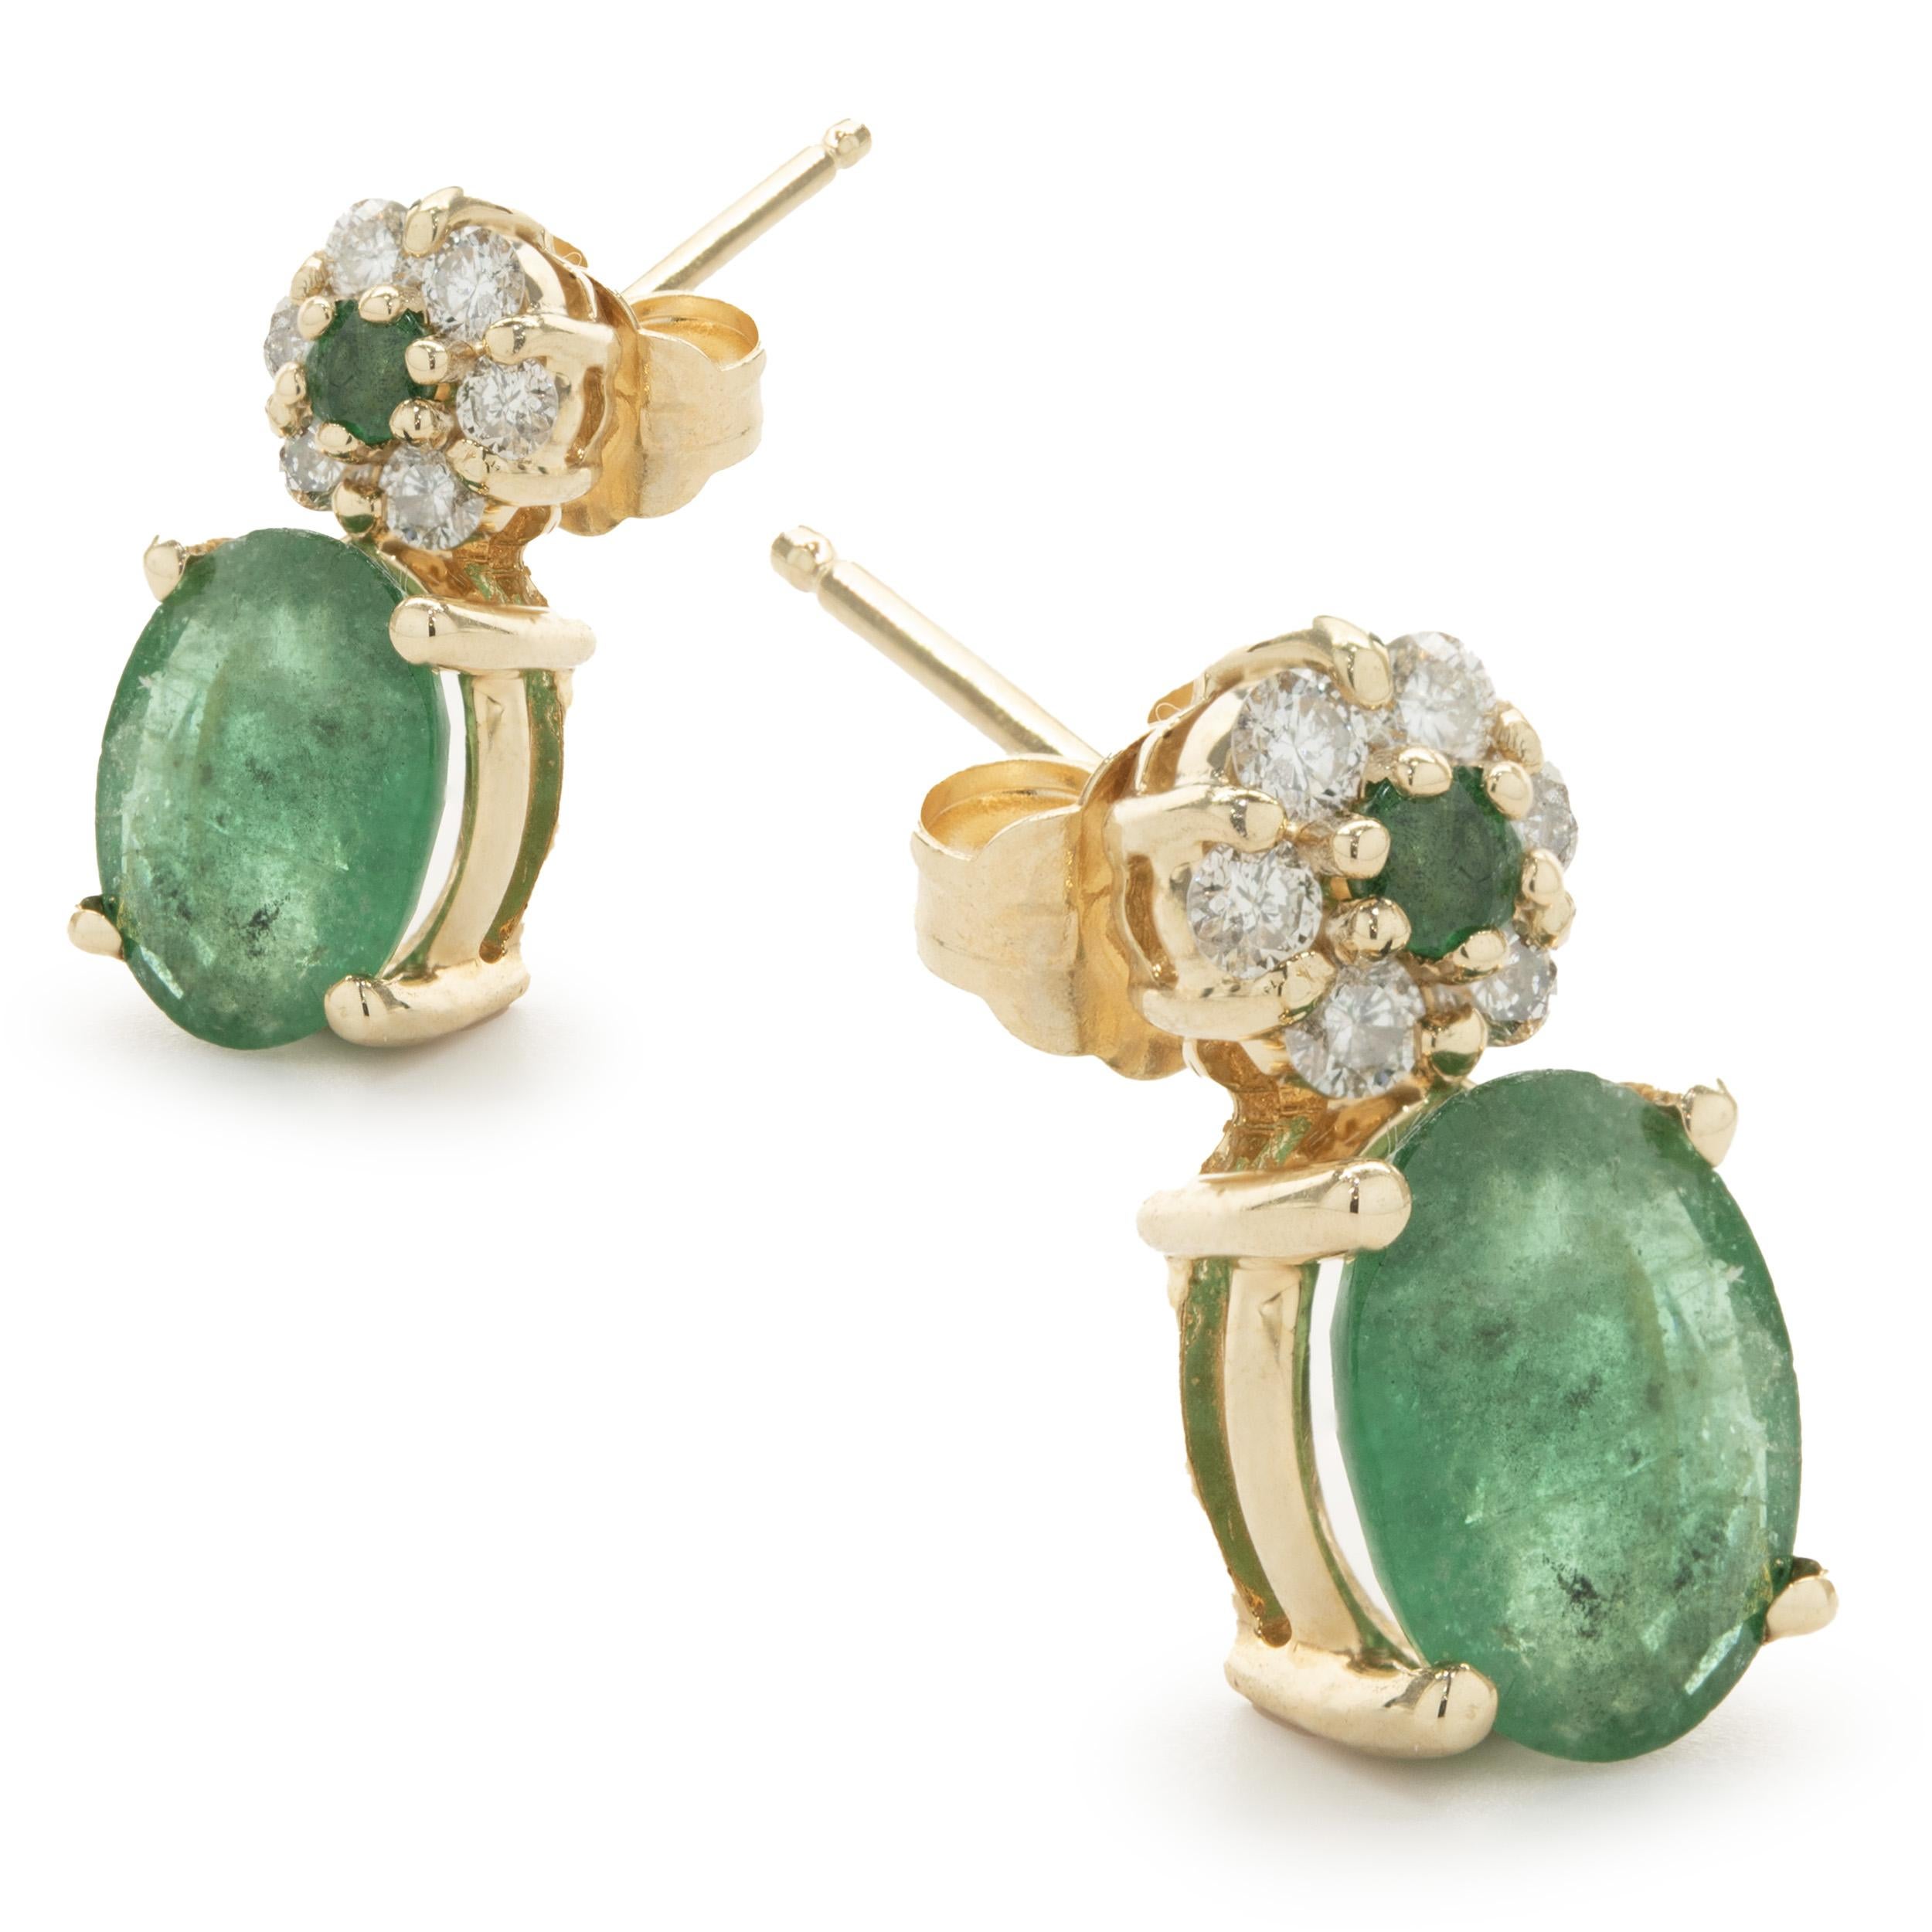 Designer: custom
Material: 14K yellow gold
Diamond: 12 round brilliant cut = 0.25cttw
Color: G
Clarity: SI1
Emerald: 2 oval cut = 2.80cttw
Dimensions: earrings measure 13.80mm in length 
Fastenings: friction backs
Weight: 2.90 grams